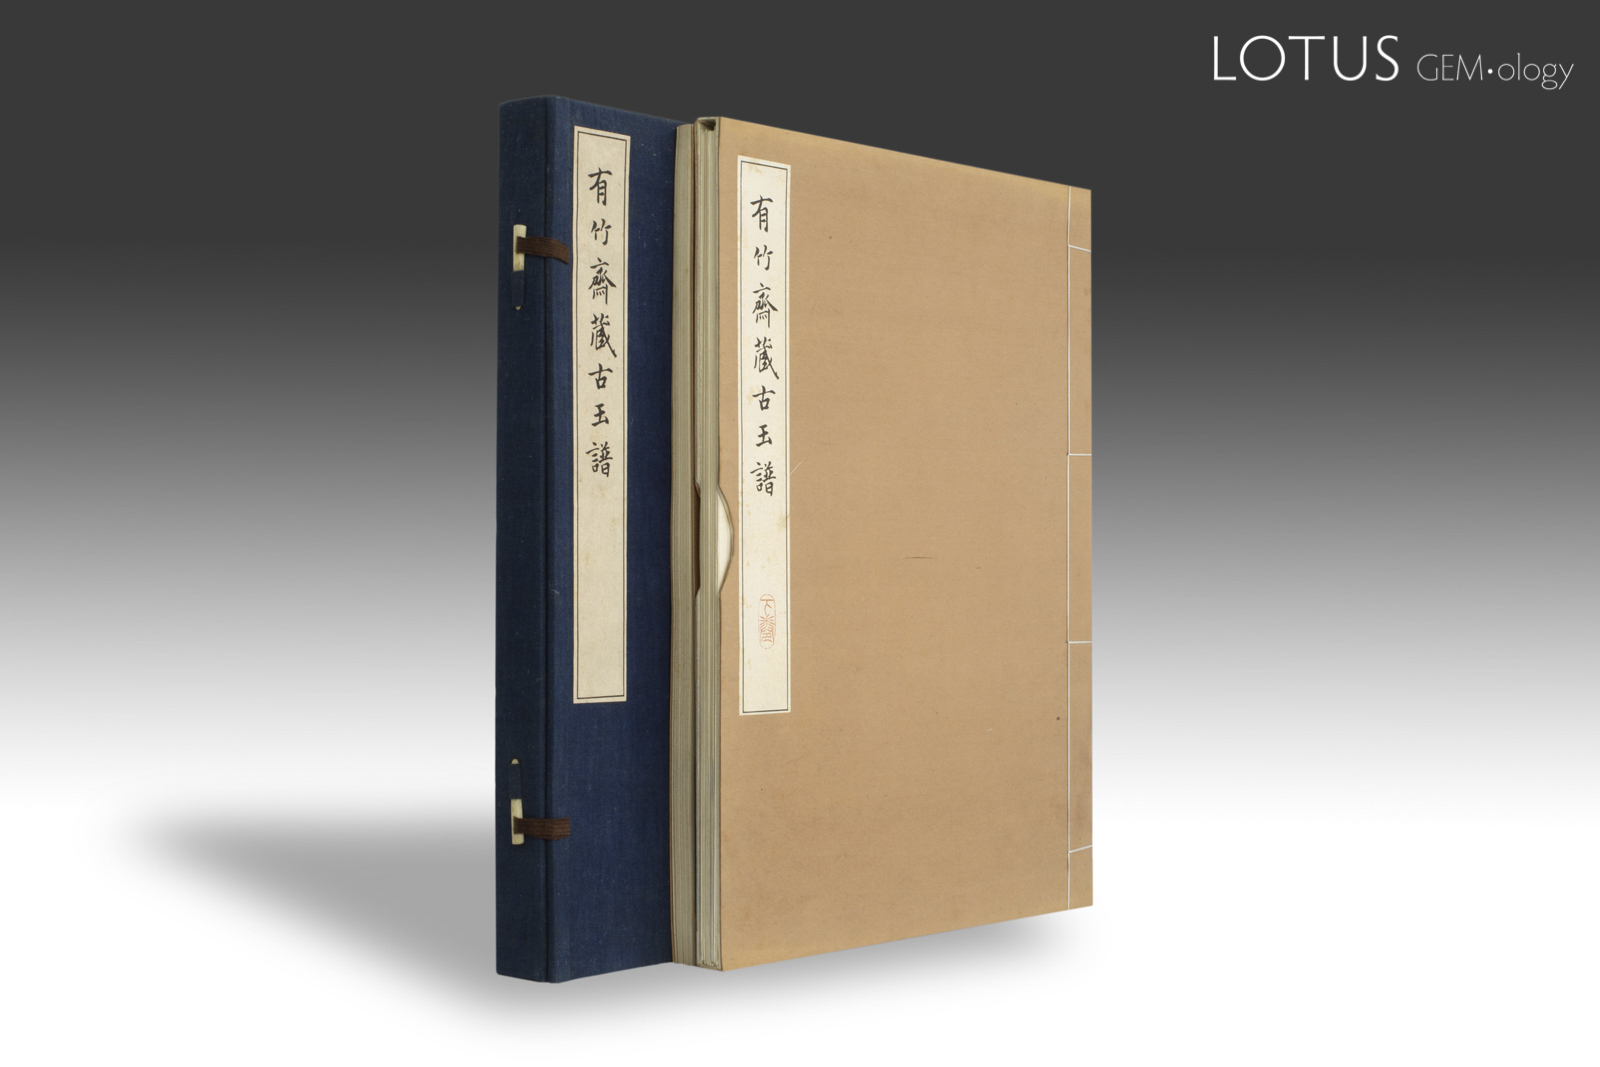 Kosaku Hamada’s 1936 有竹斎蔵古玉譜 [Yuchikusaizo-Kogyokufu, or The Early Chinese Jades in the Collection of the Late Riichi Uyeno]. The two volumes were housed in a traditional Japanese case, making this particularly collectable.